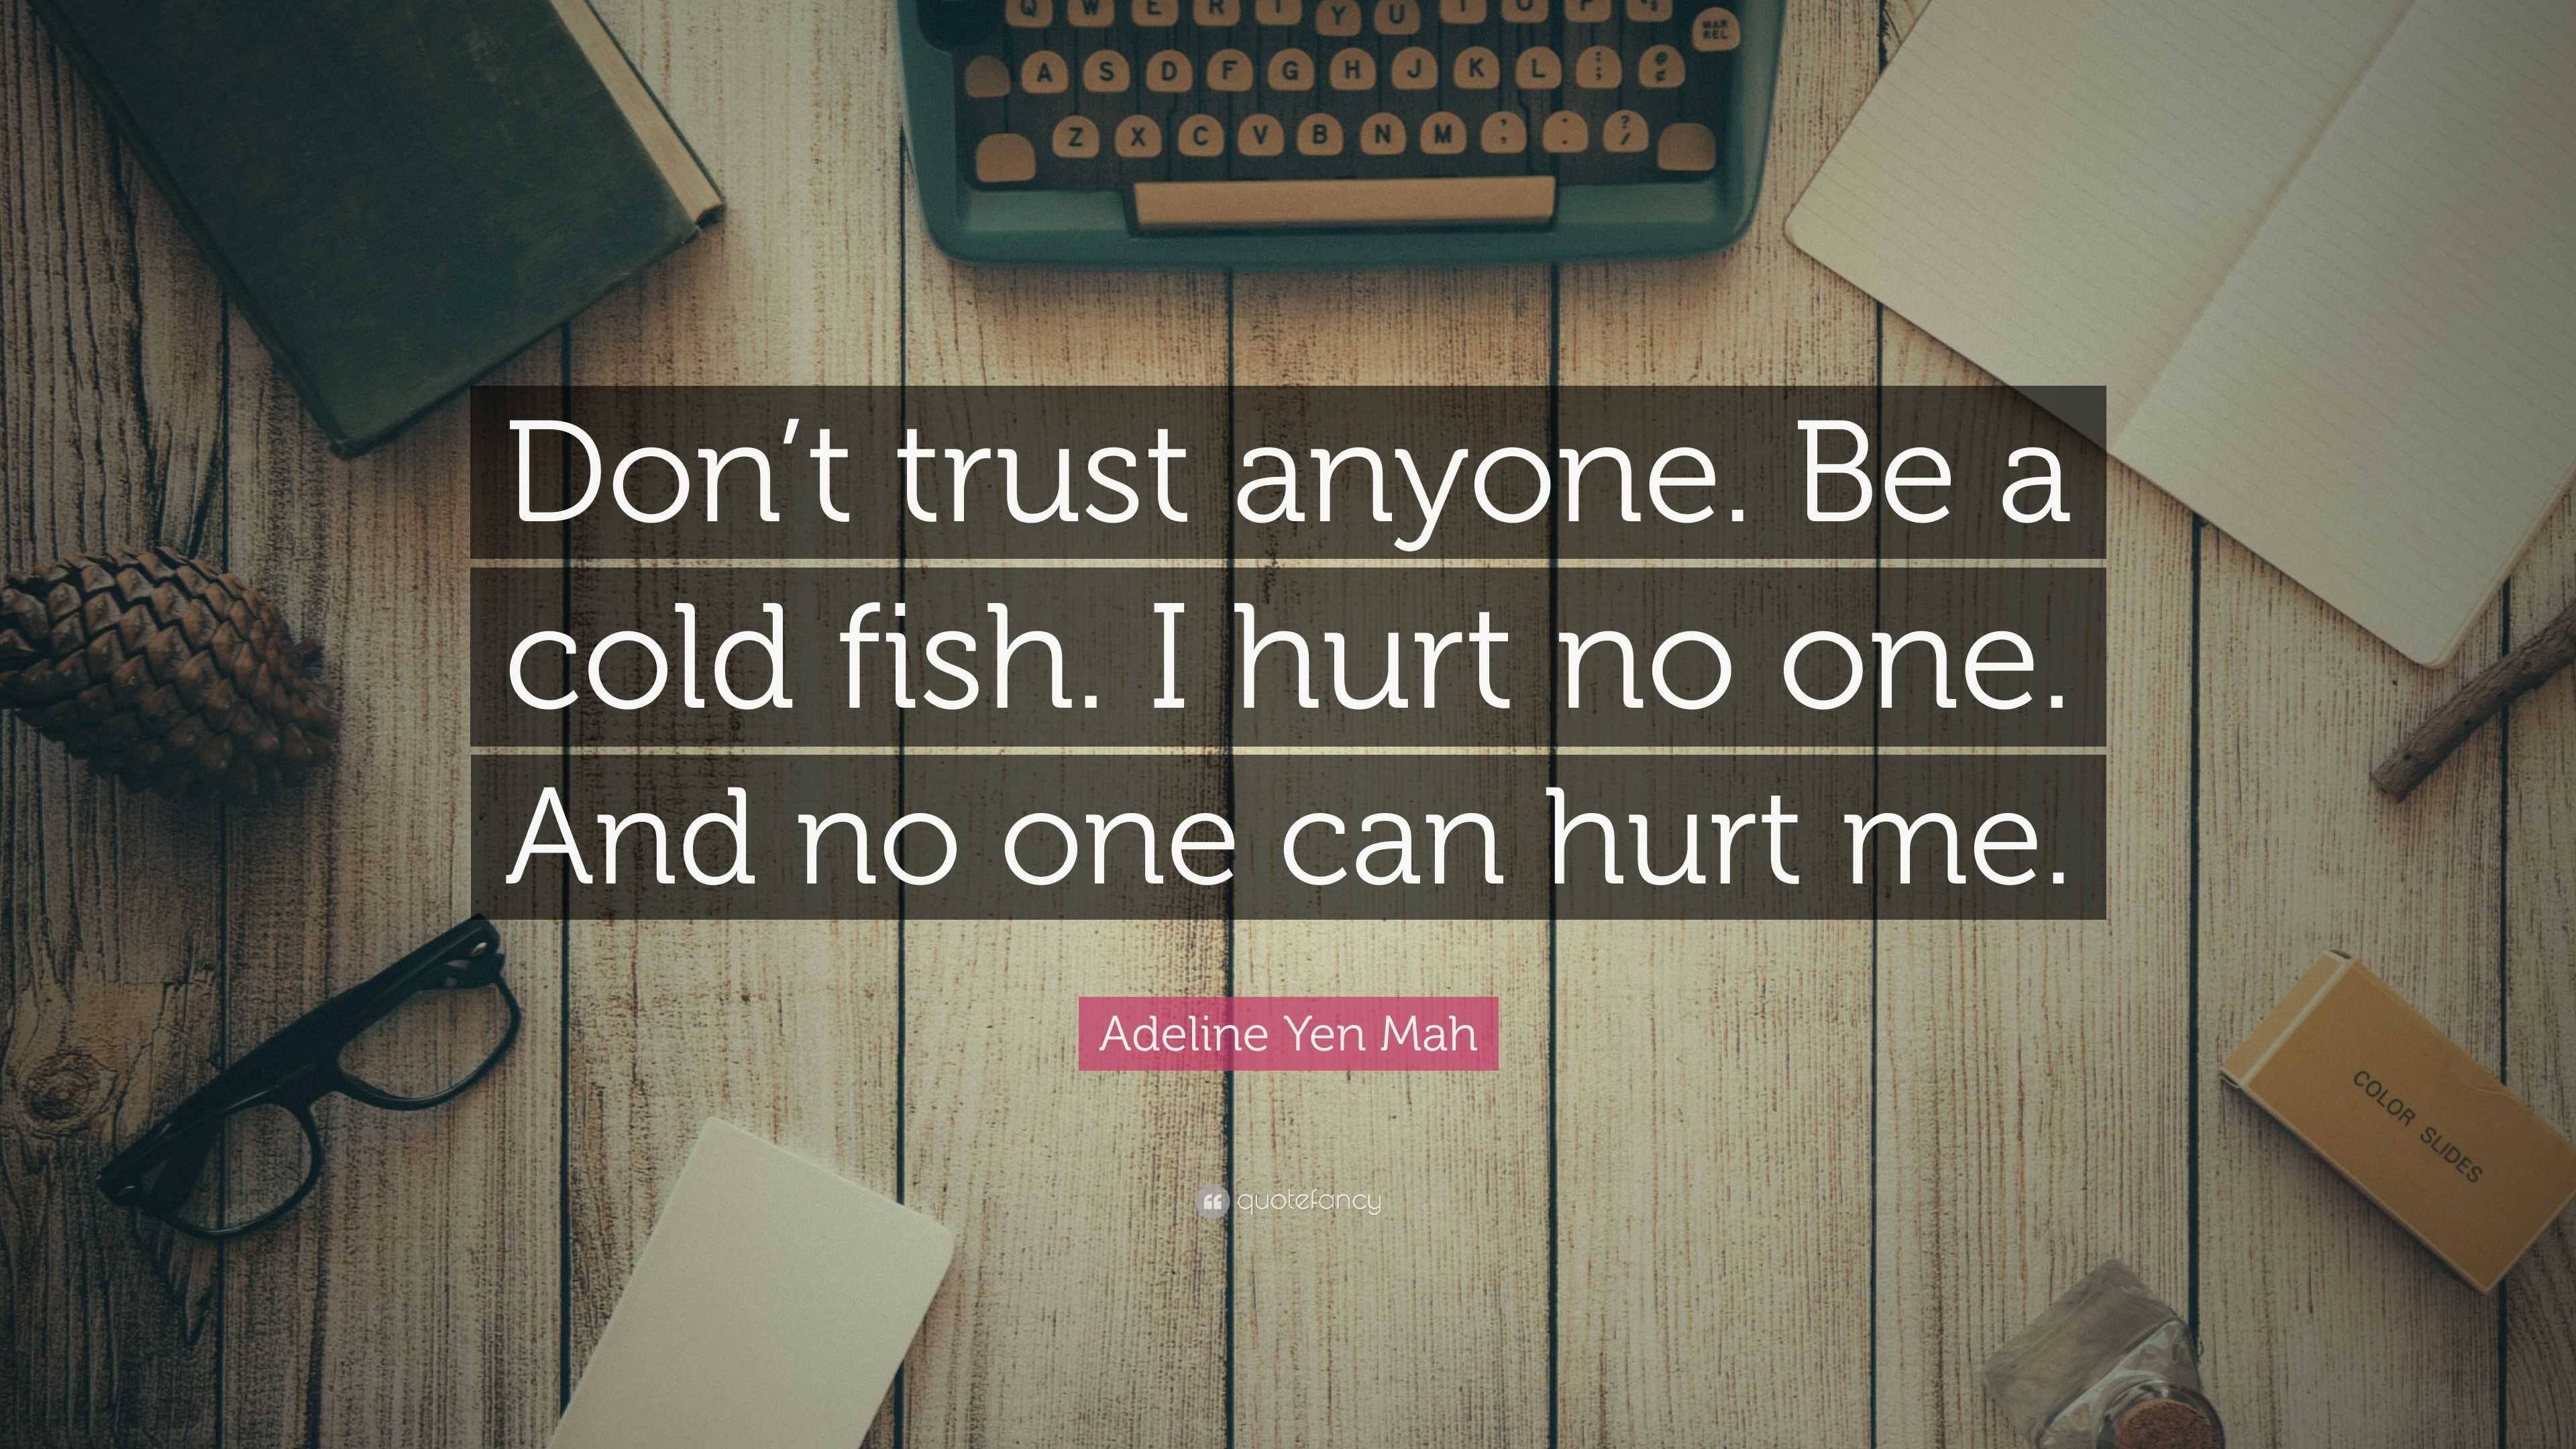 And no one can hurt me. 